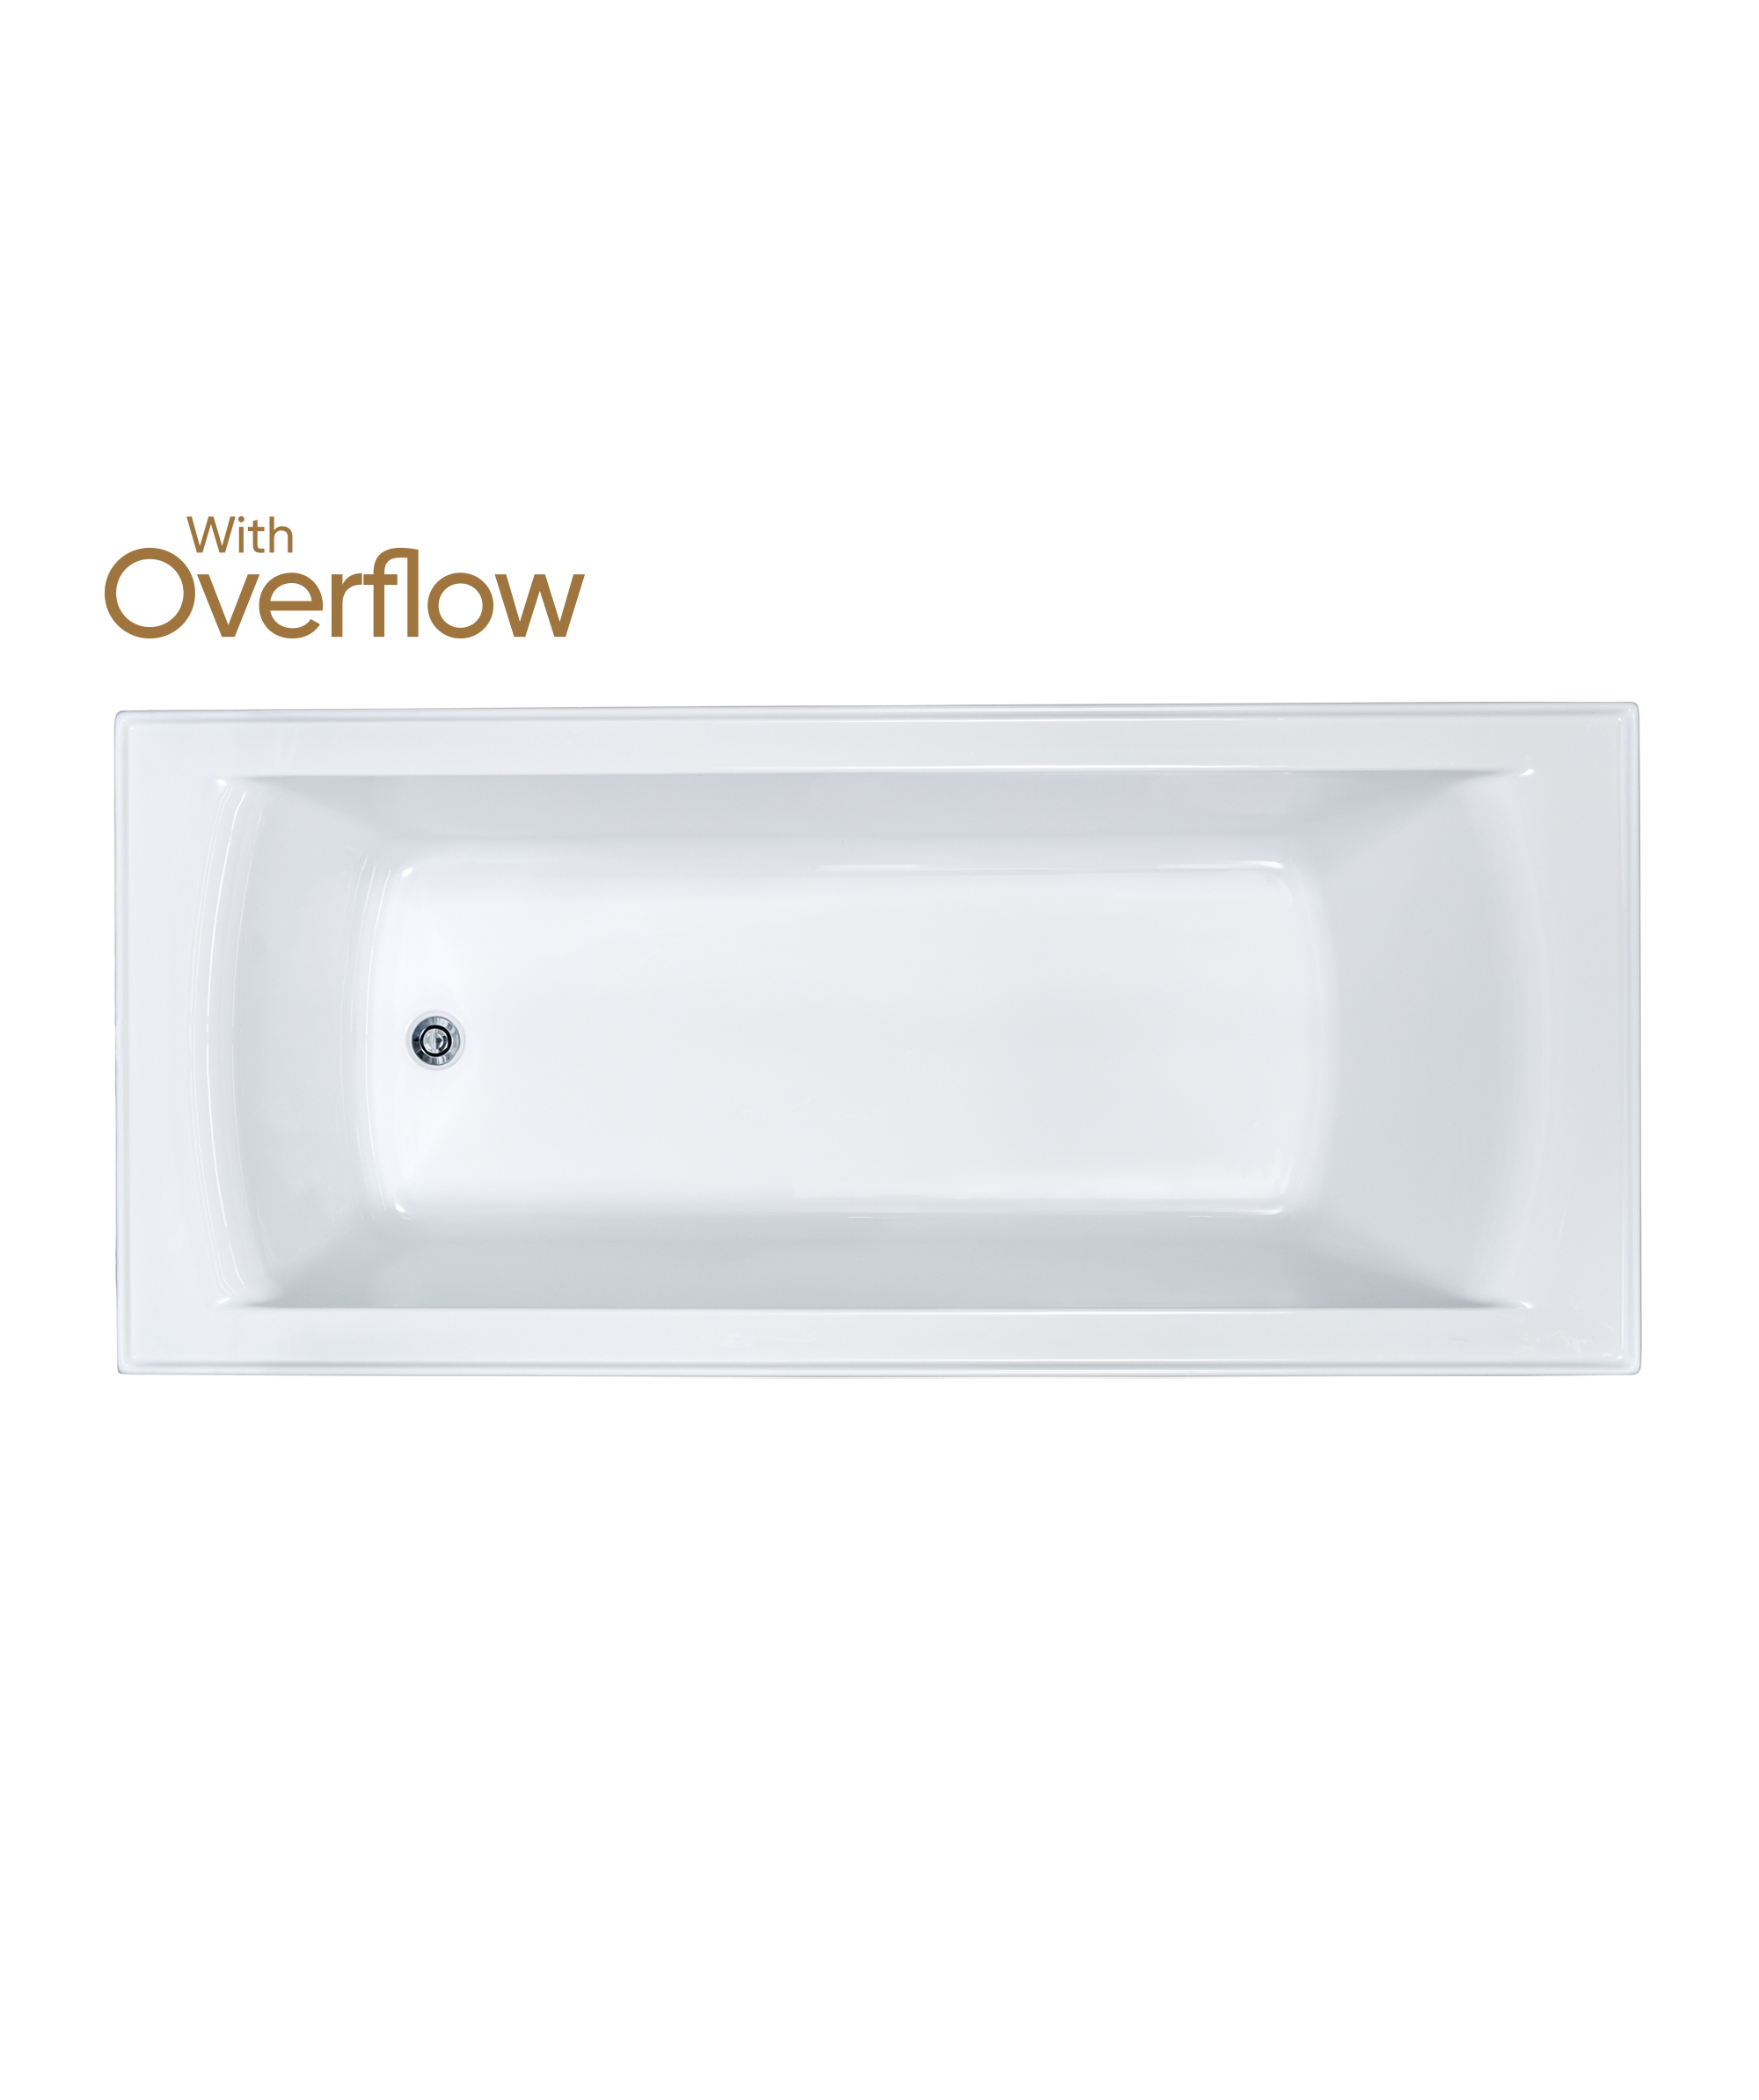 Syros 103 (Select) inset bath - with Overflow Basic and Plug+Waste